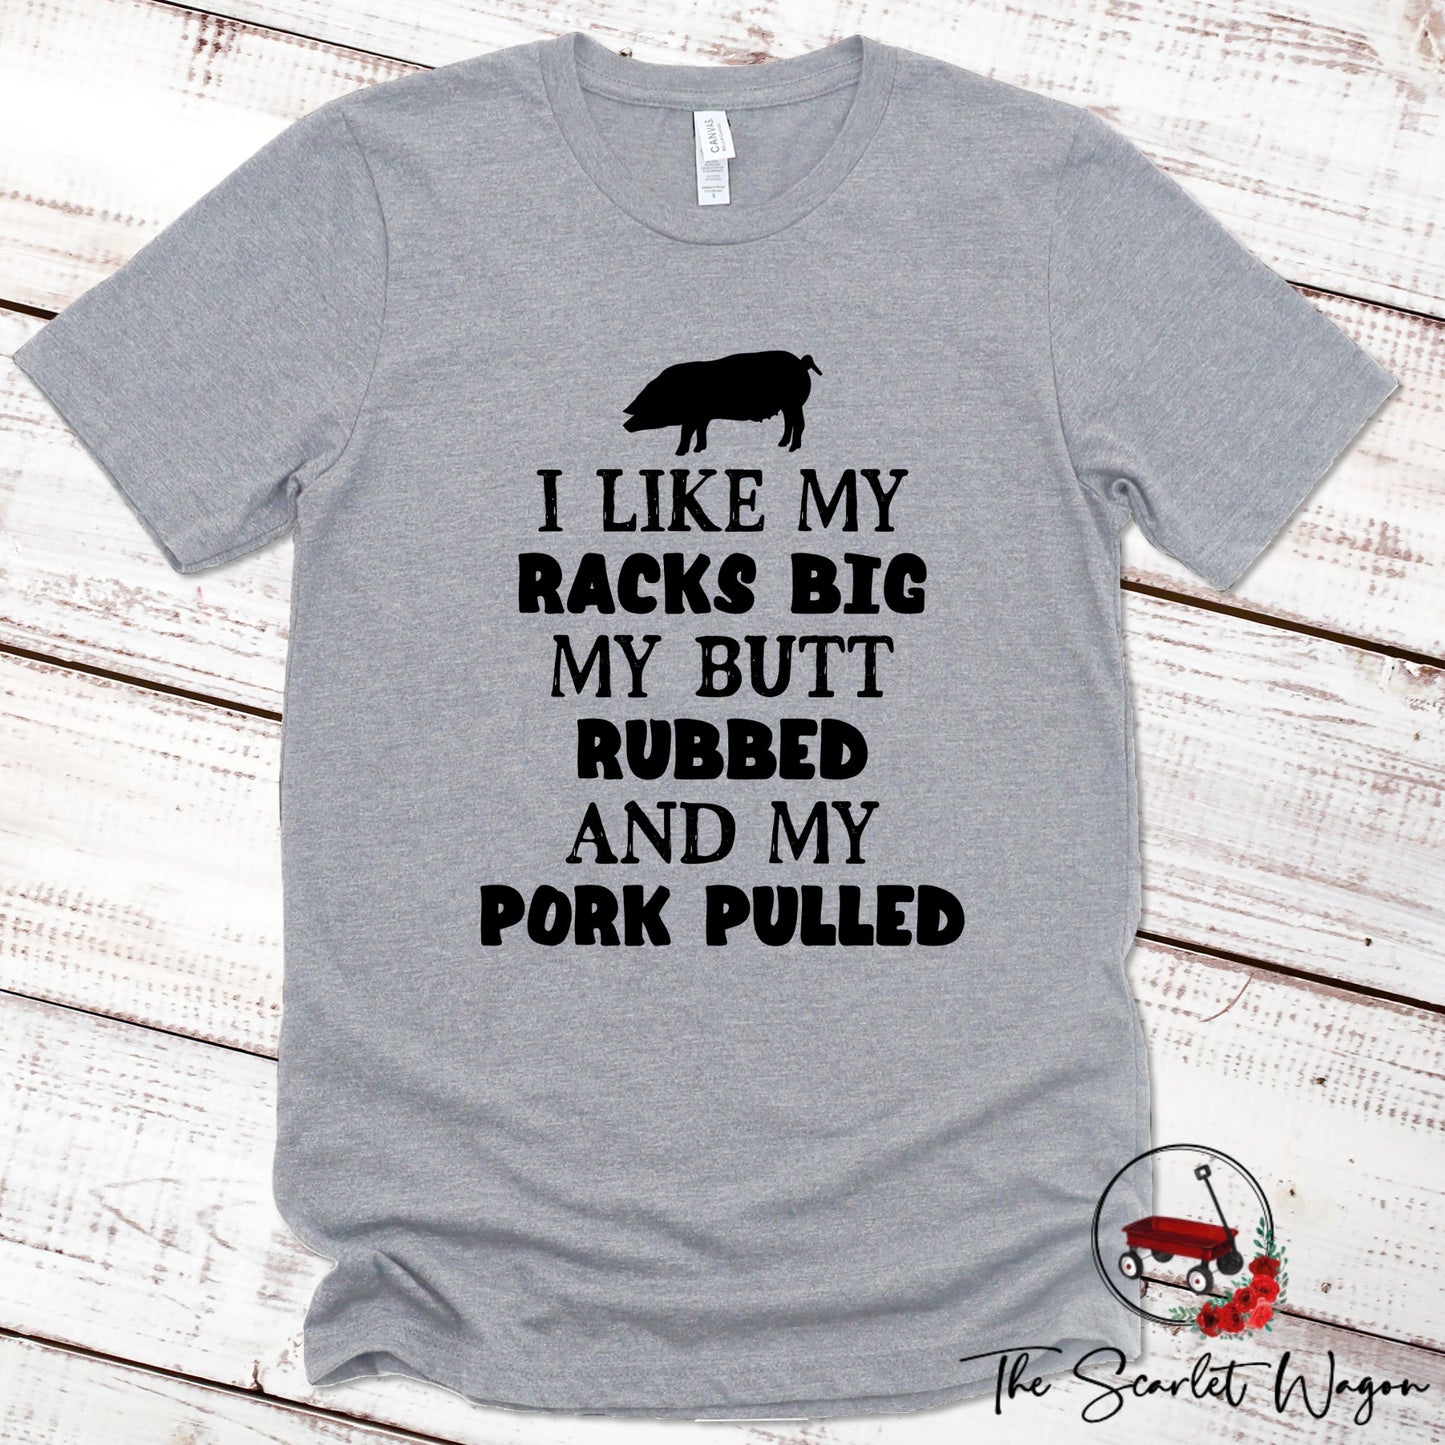 I Like My Racks Big, My Butt Rubbed and My Pork Pulled Premium Tee Scarlet Wagon Athletic Heather XS 